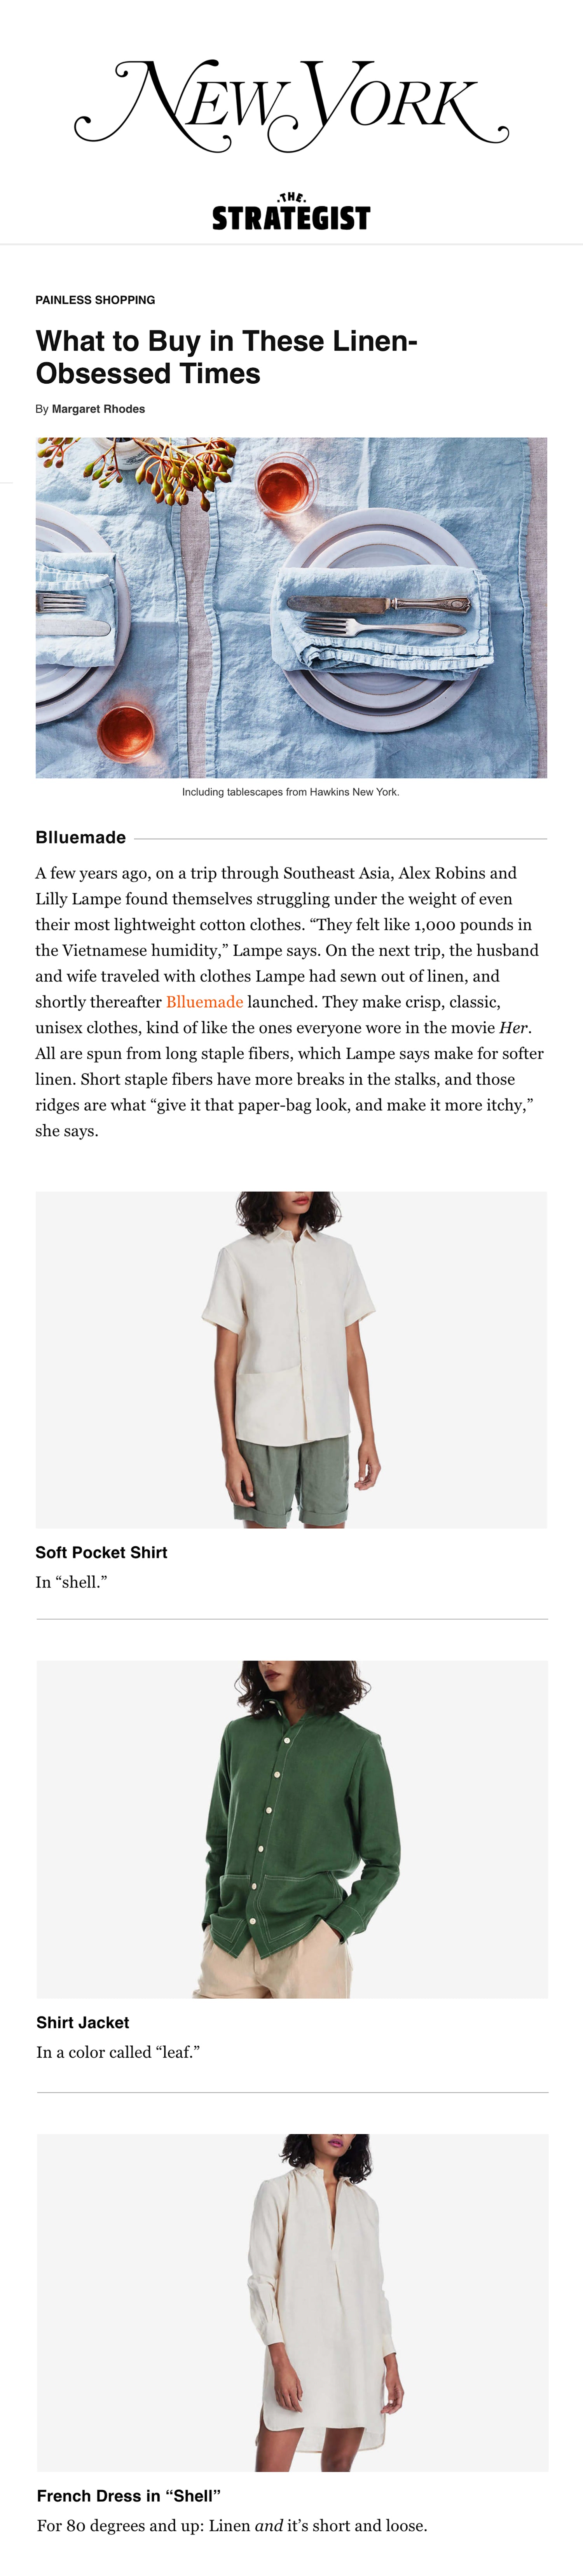 The Strategist New York Magazine Blluemade What to Buy in These Linen-Obsessed Times